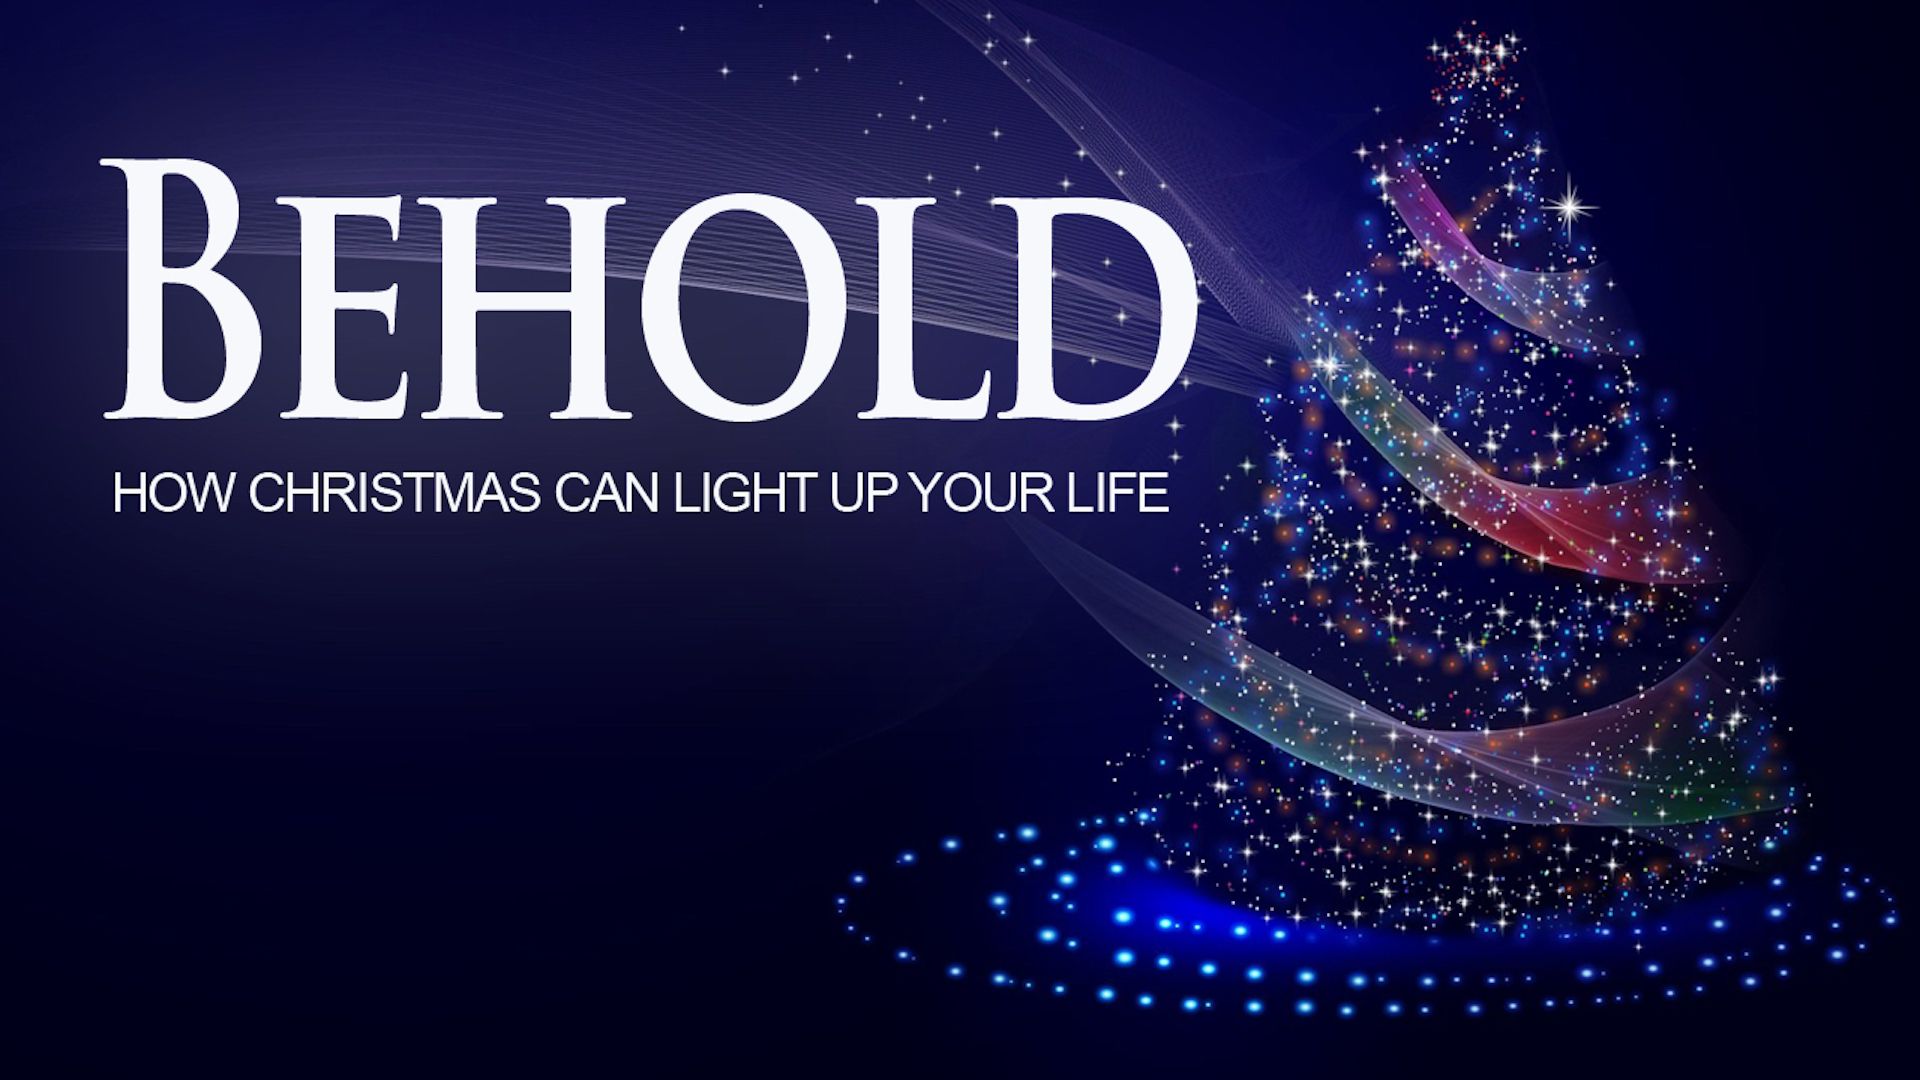 Behold: How Christmas Can Light Up Your Life.